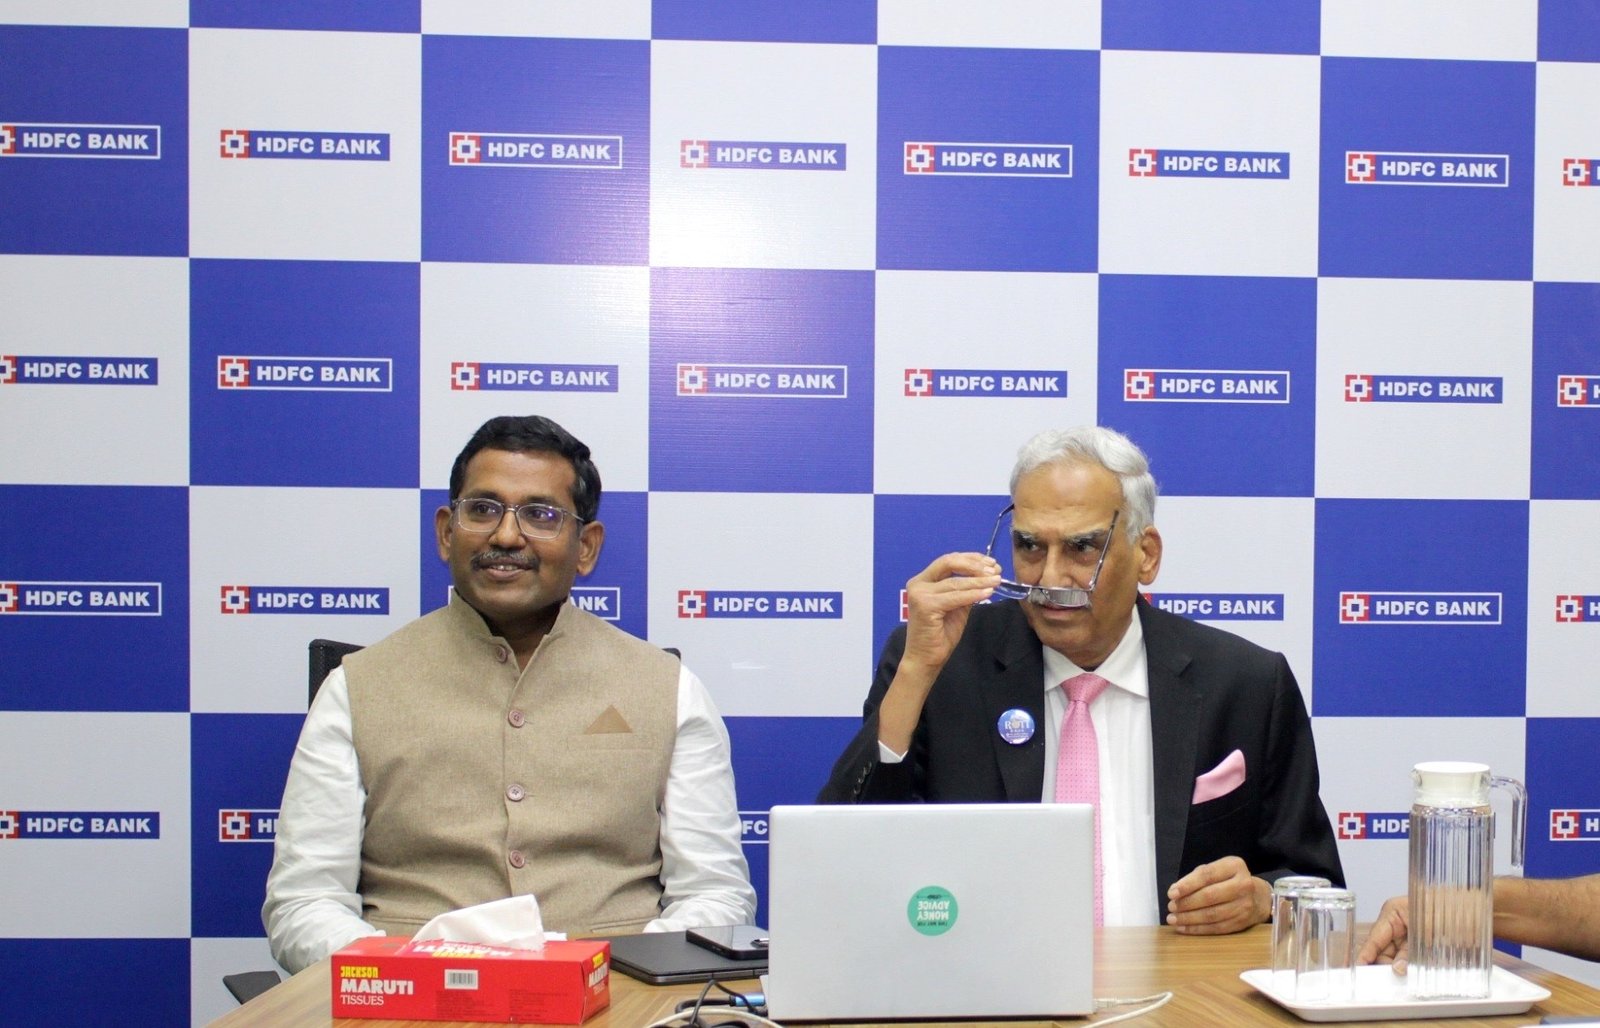 Mr. D. Sivanandhan addressing the employees of HDFC Bank along with Mr. Sundaresan M